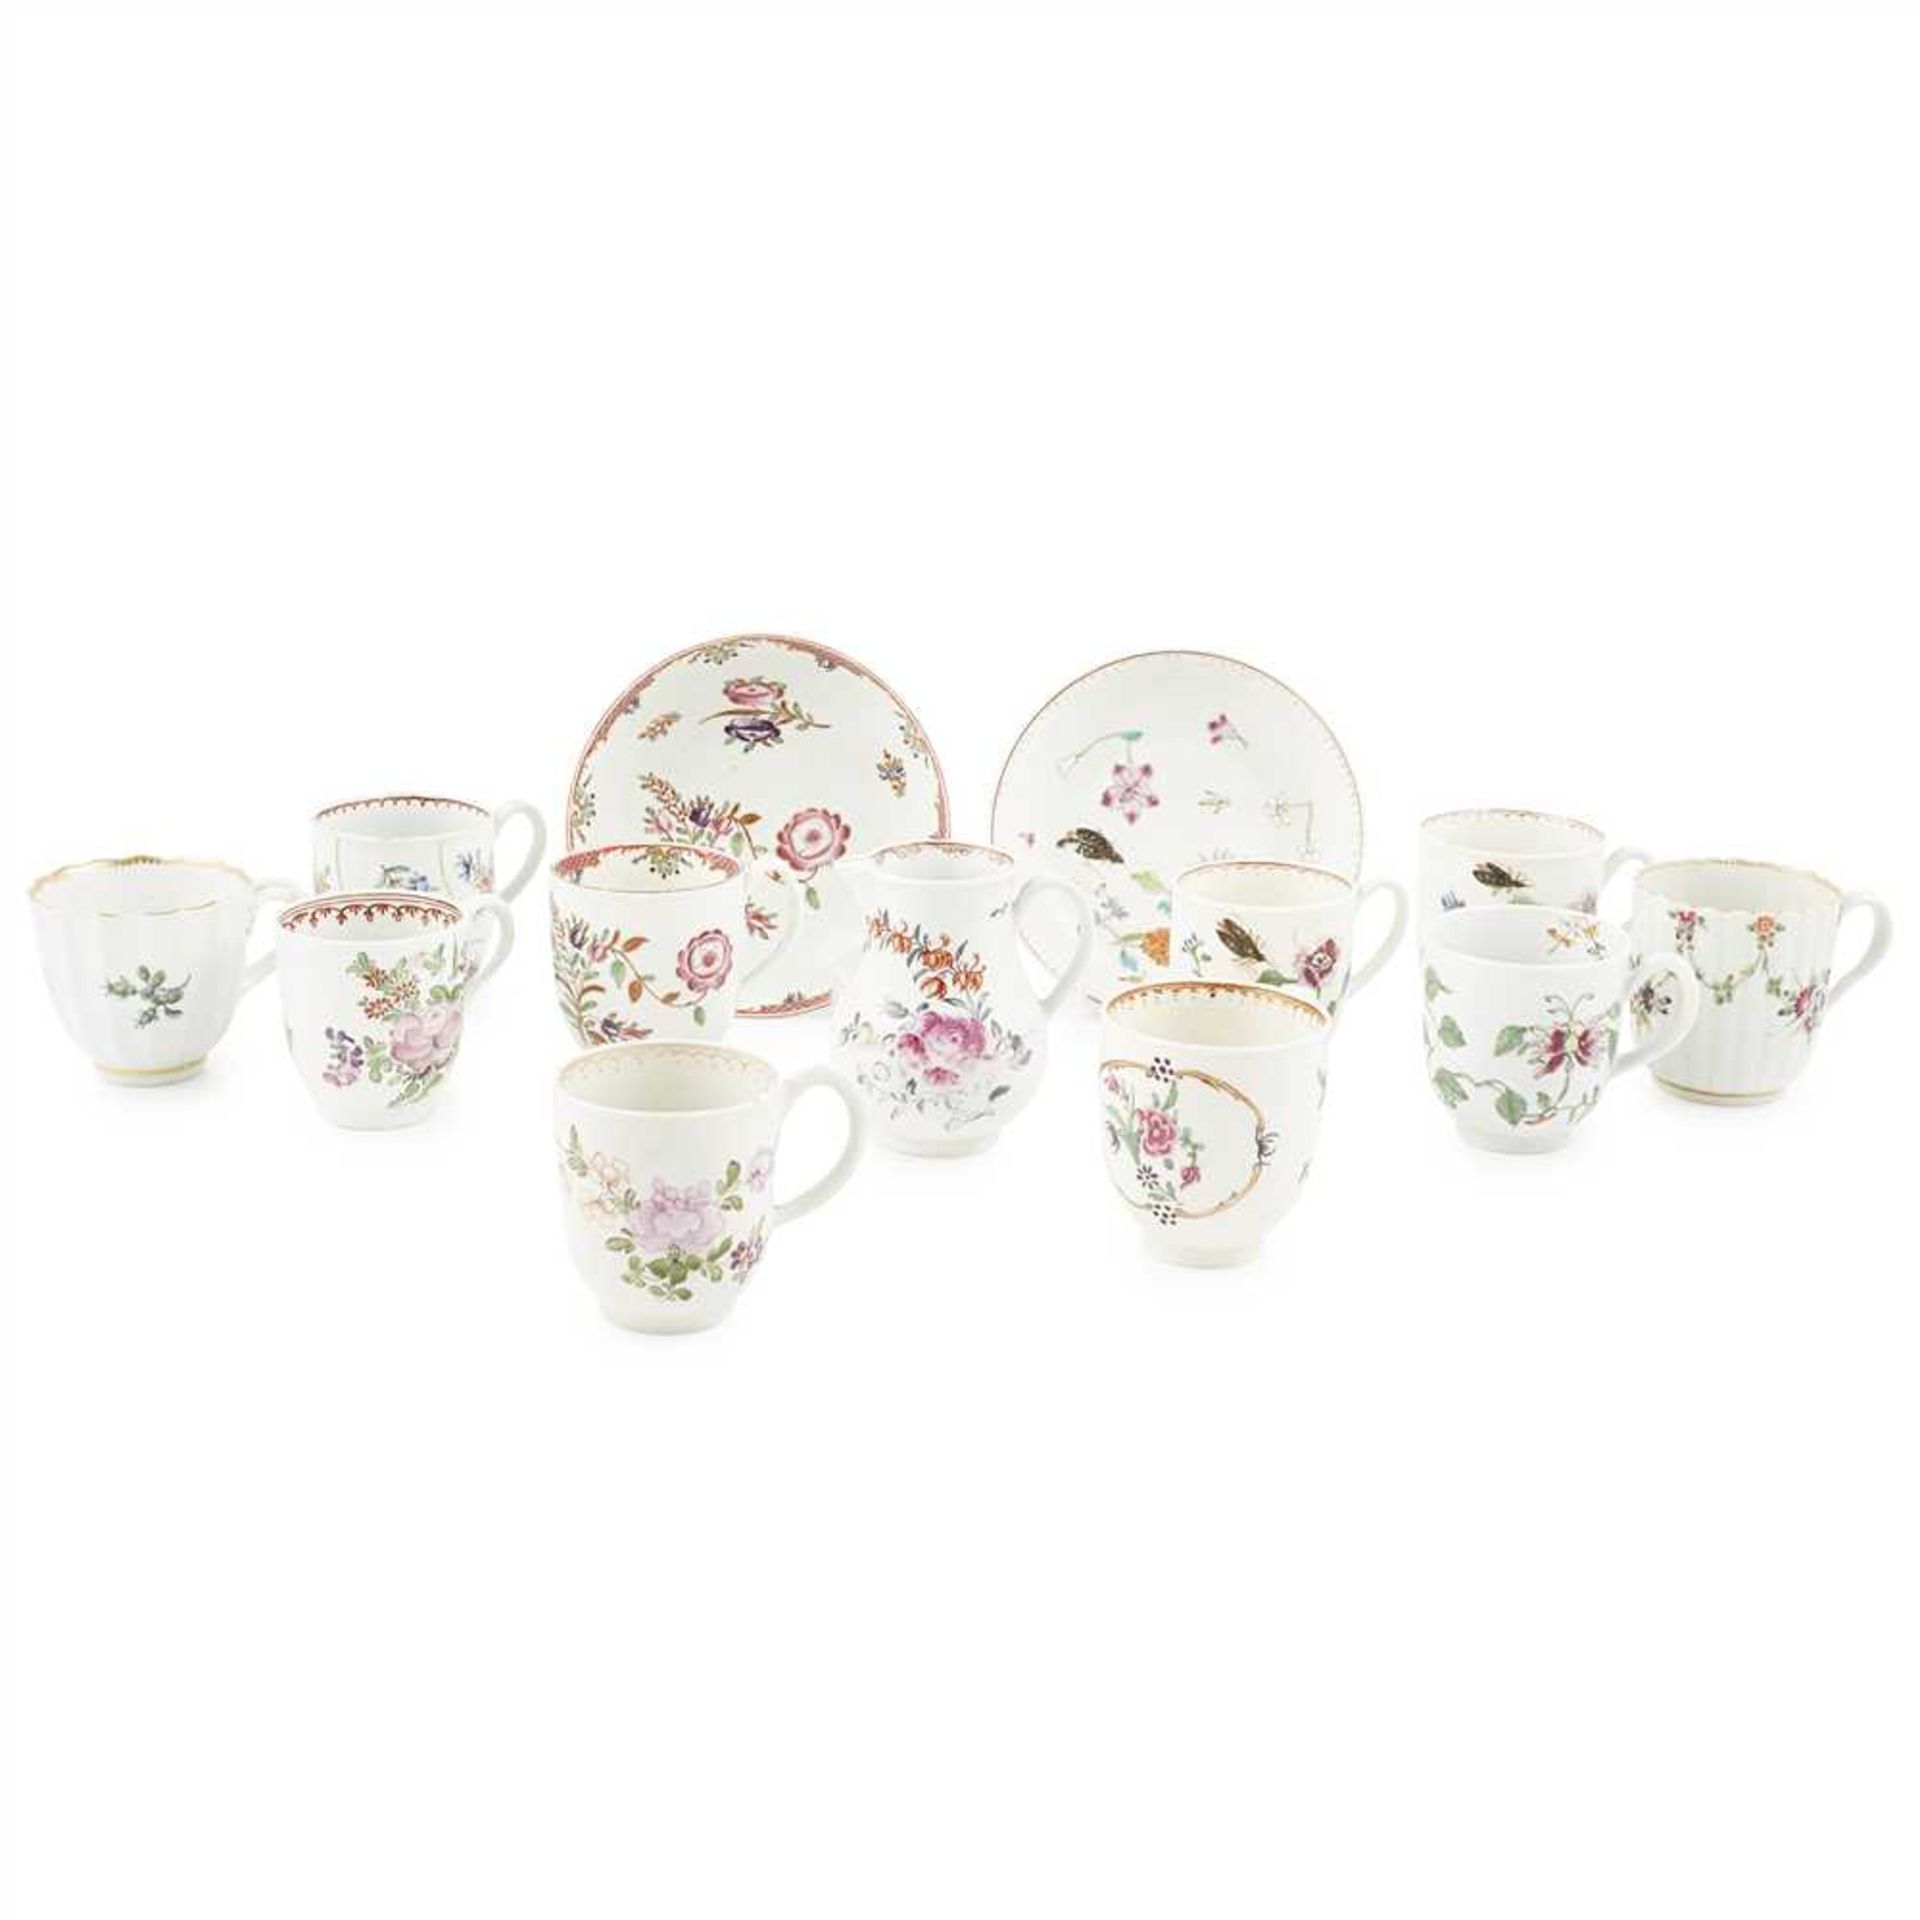 GROUP OF WORCESTER COFFEE WARES 18TH CENTURY